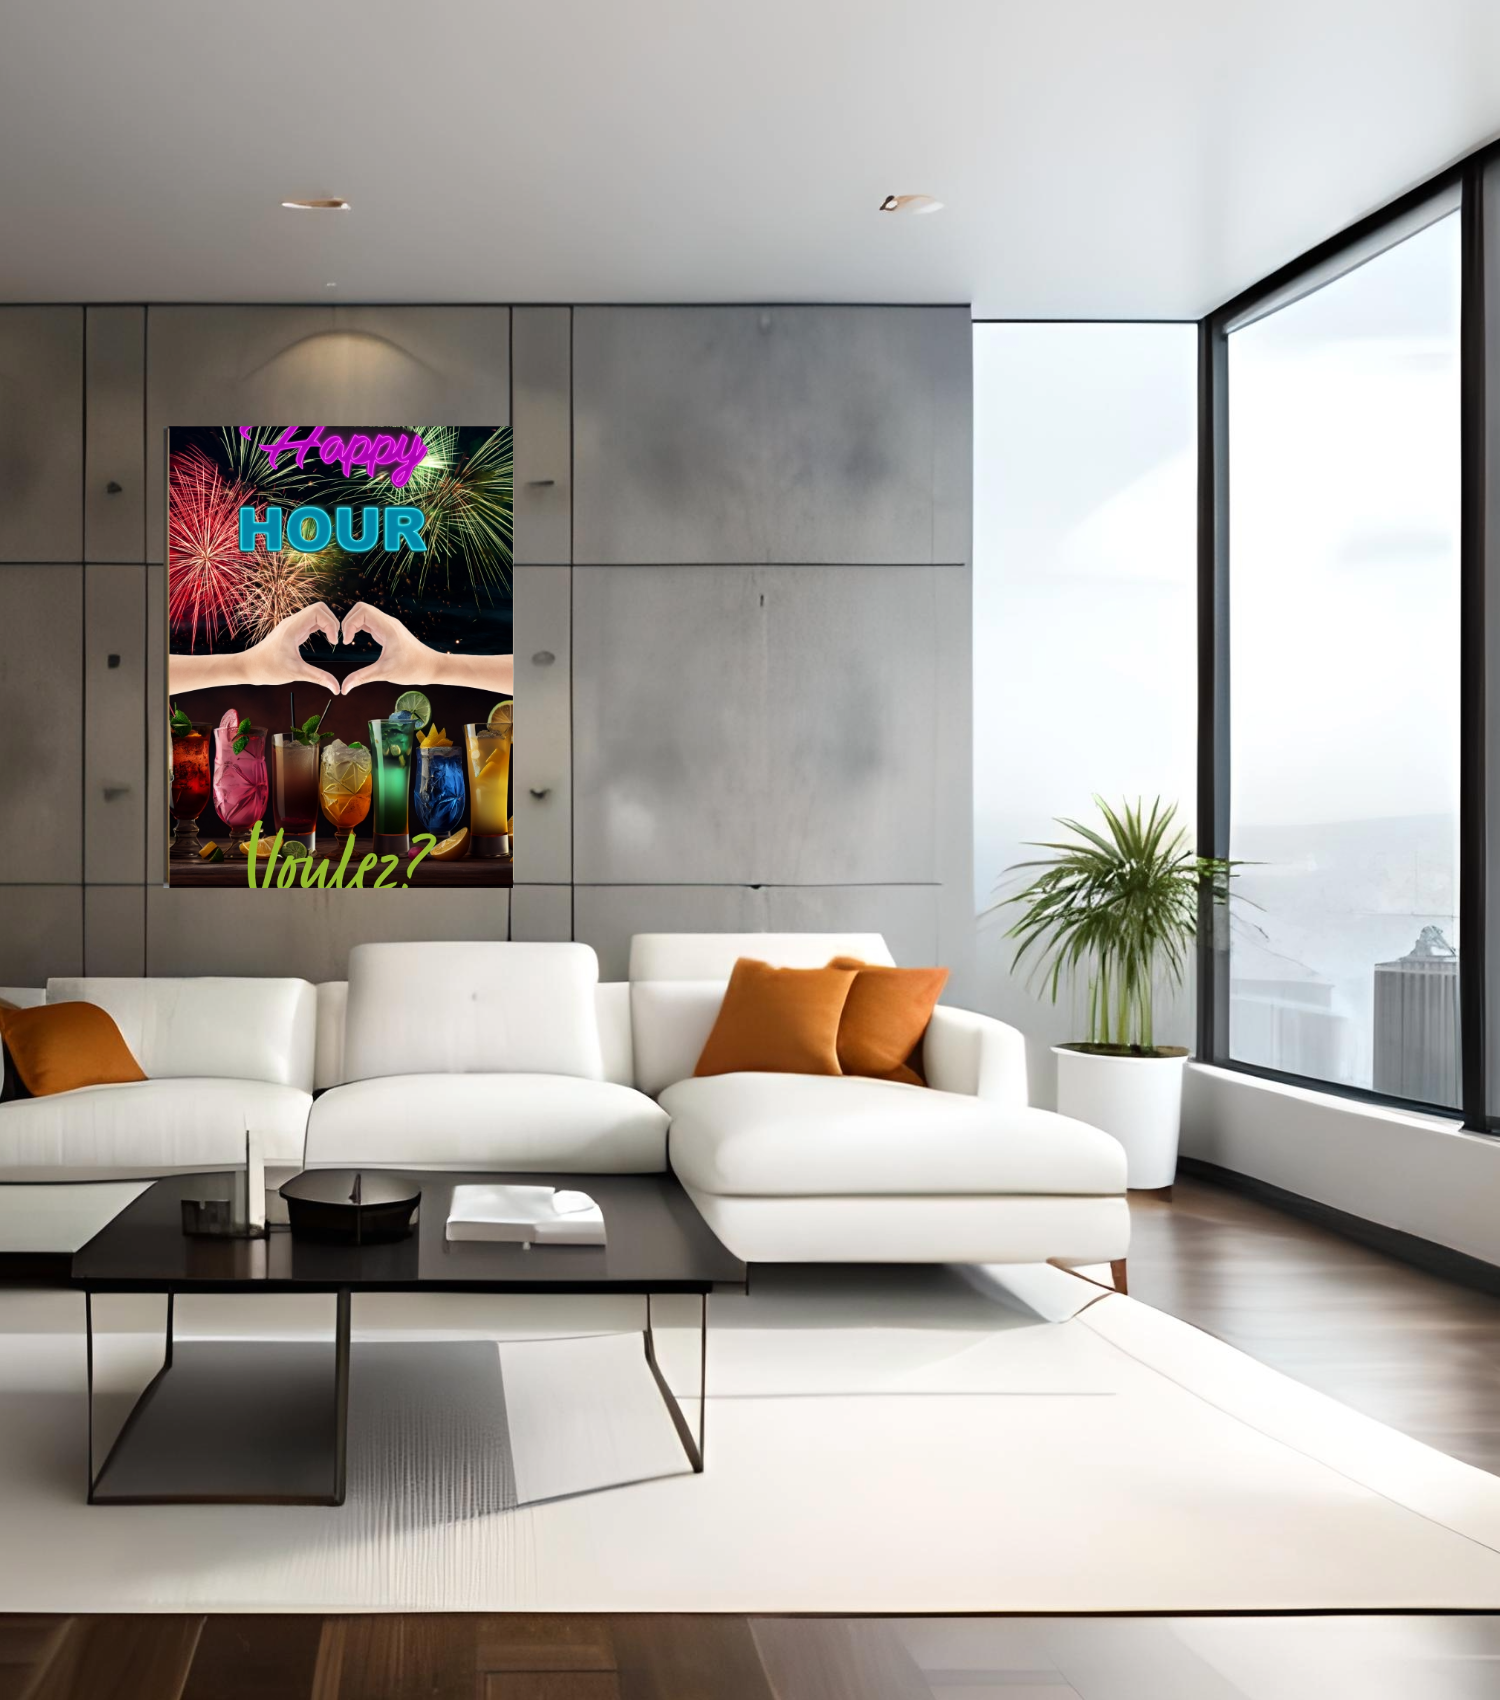 Wall Art HAPPY HOUR 30X 40 Gallery Wrap Canvas Print Art Deco Painting Giclee Love Fun Design Ready to Hang